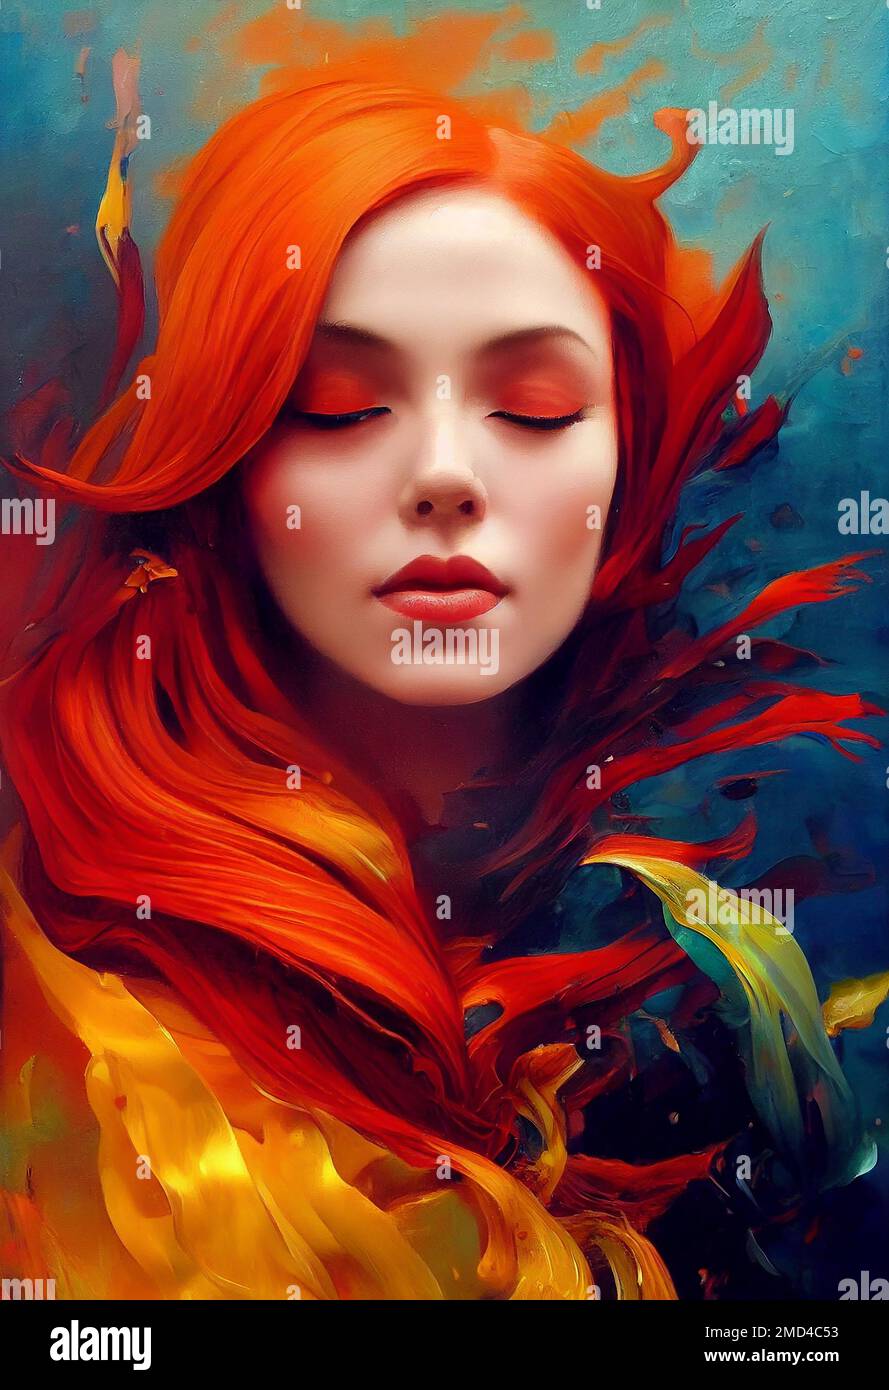 Portrait of a beautiful woman wiht colorful oil painting hair Stock Photo